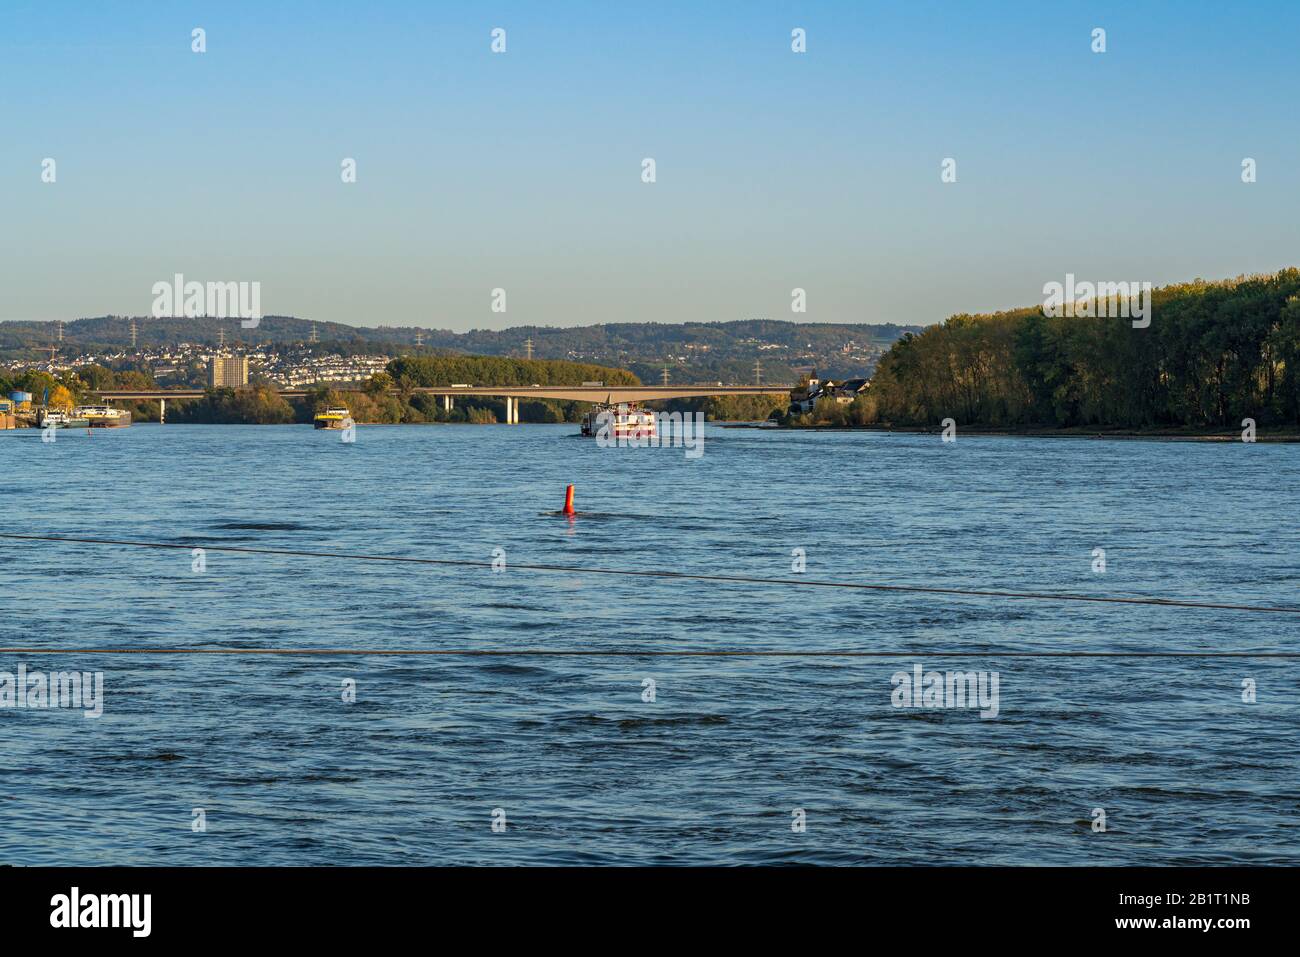 Neuwied, Rhineland-Palatine, Germany - October 14, 2019: View at the River Rhine from Engers, with the motorway bridge in the background Stock Photo